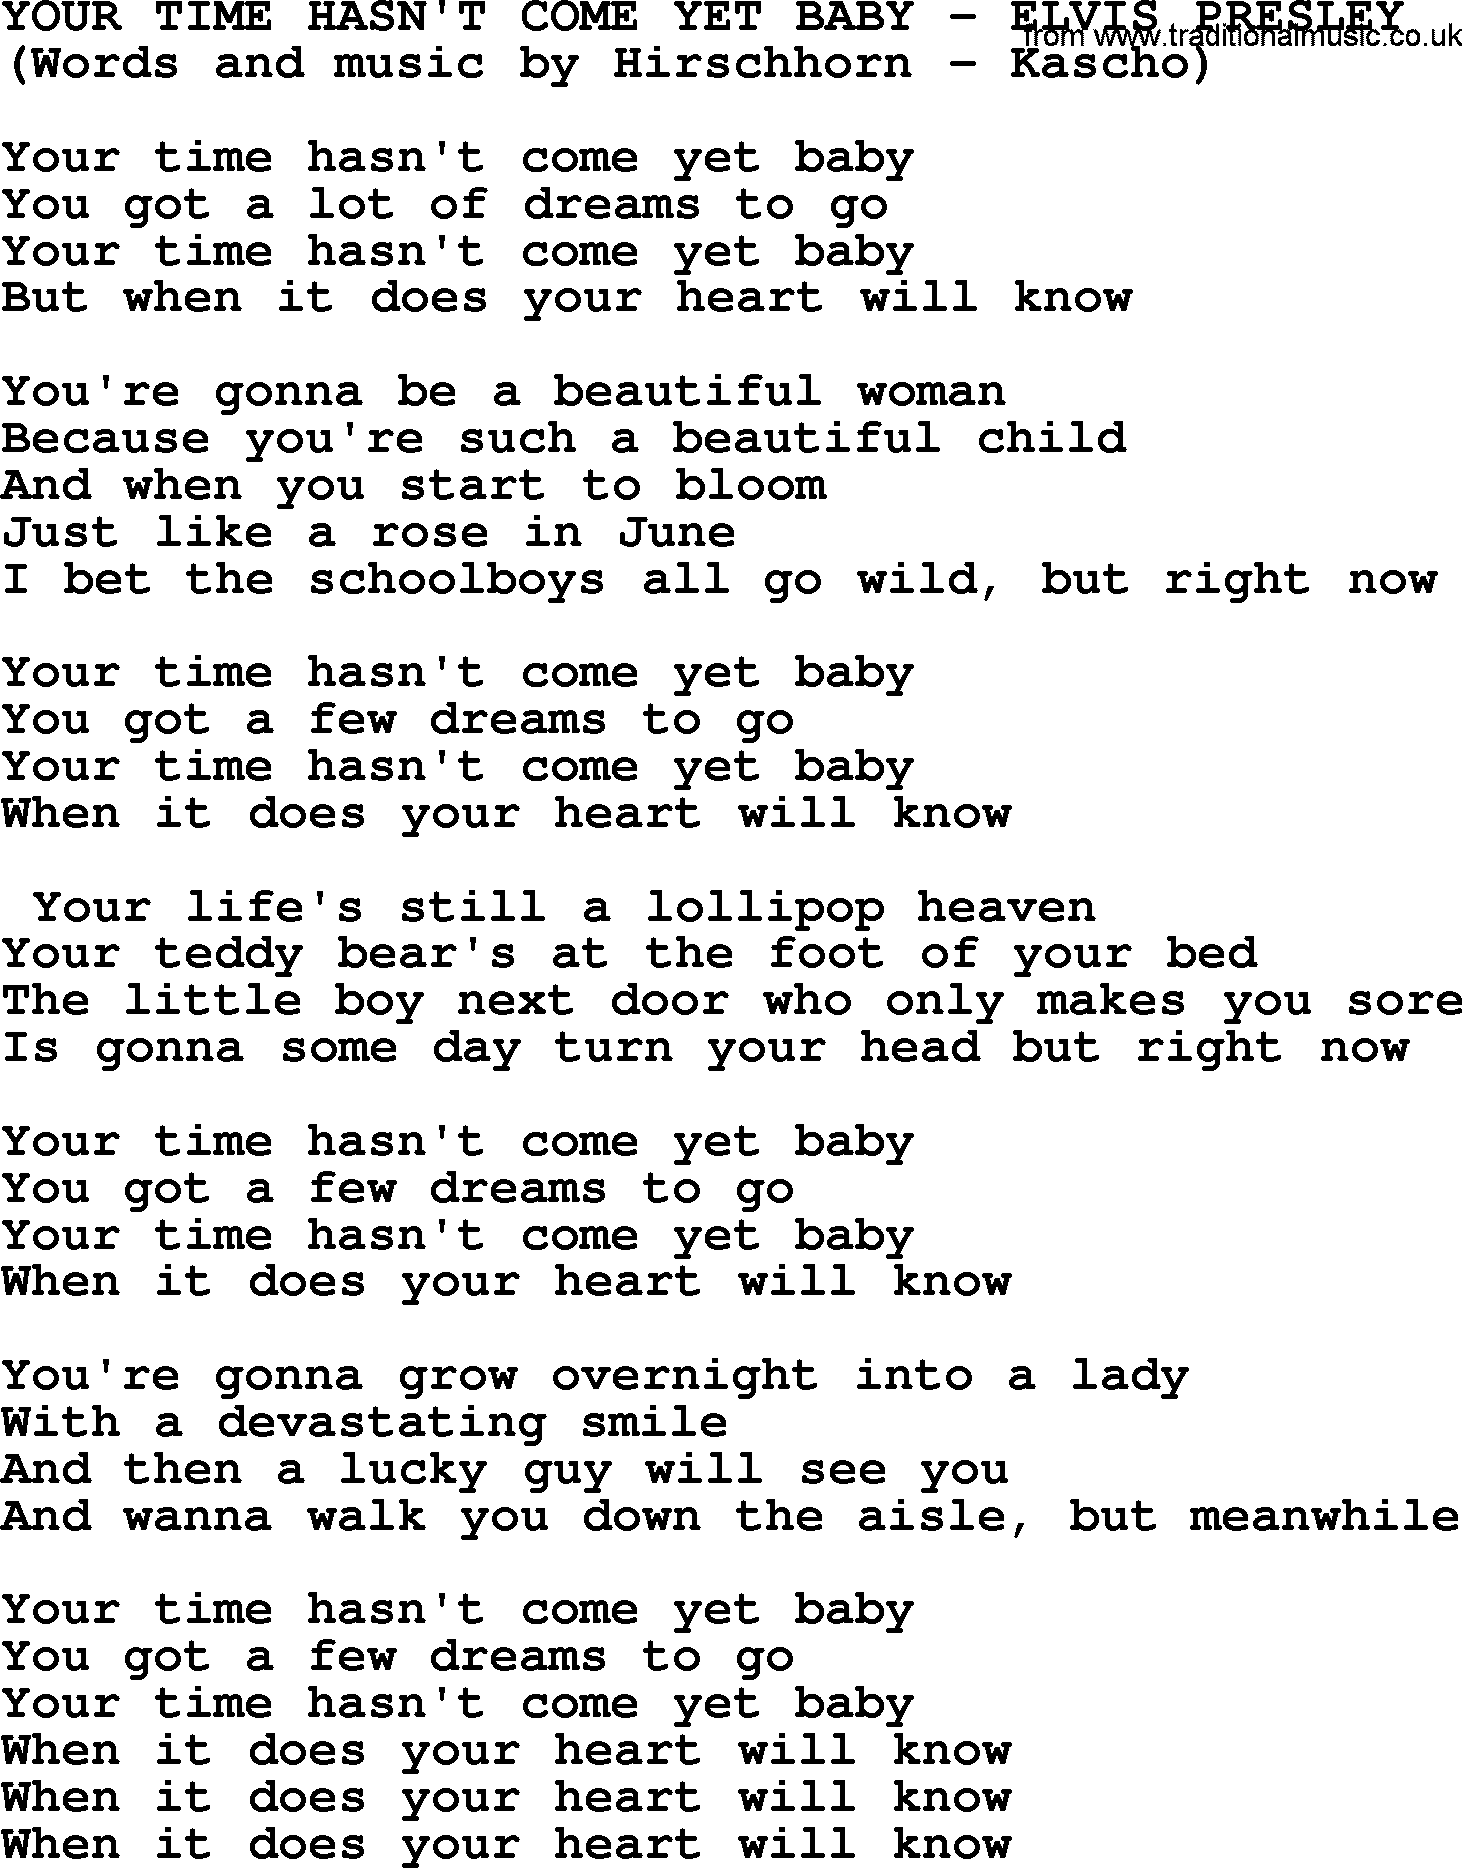 Elvis Presley song: Your Time Hasn't Come Yet Baby lyrics